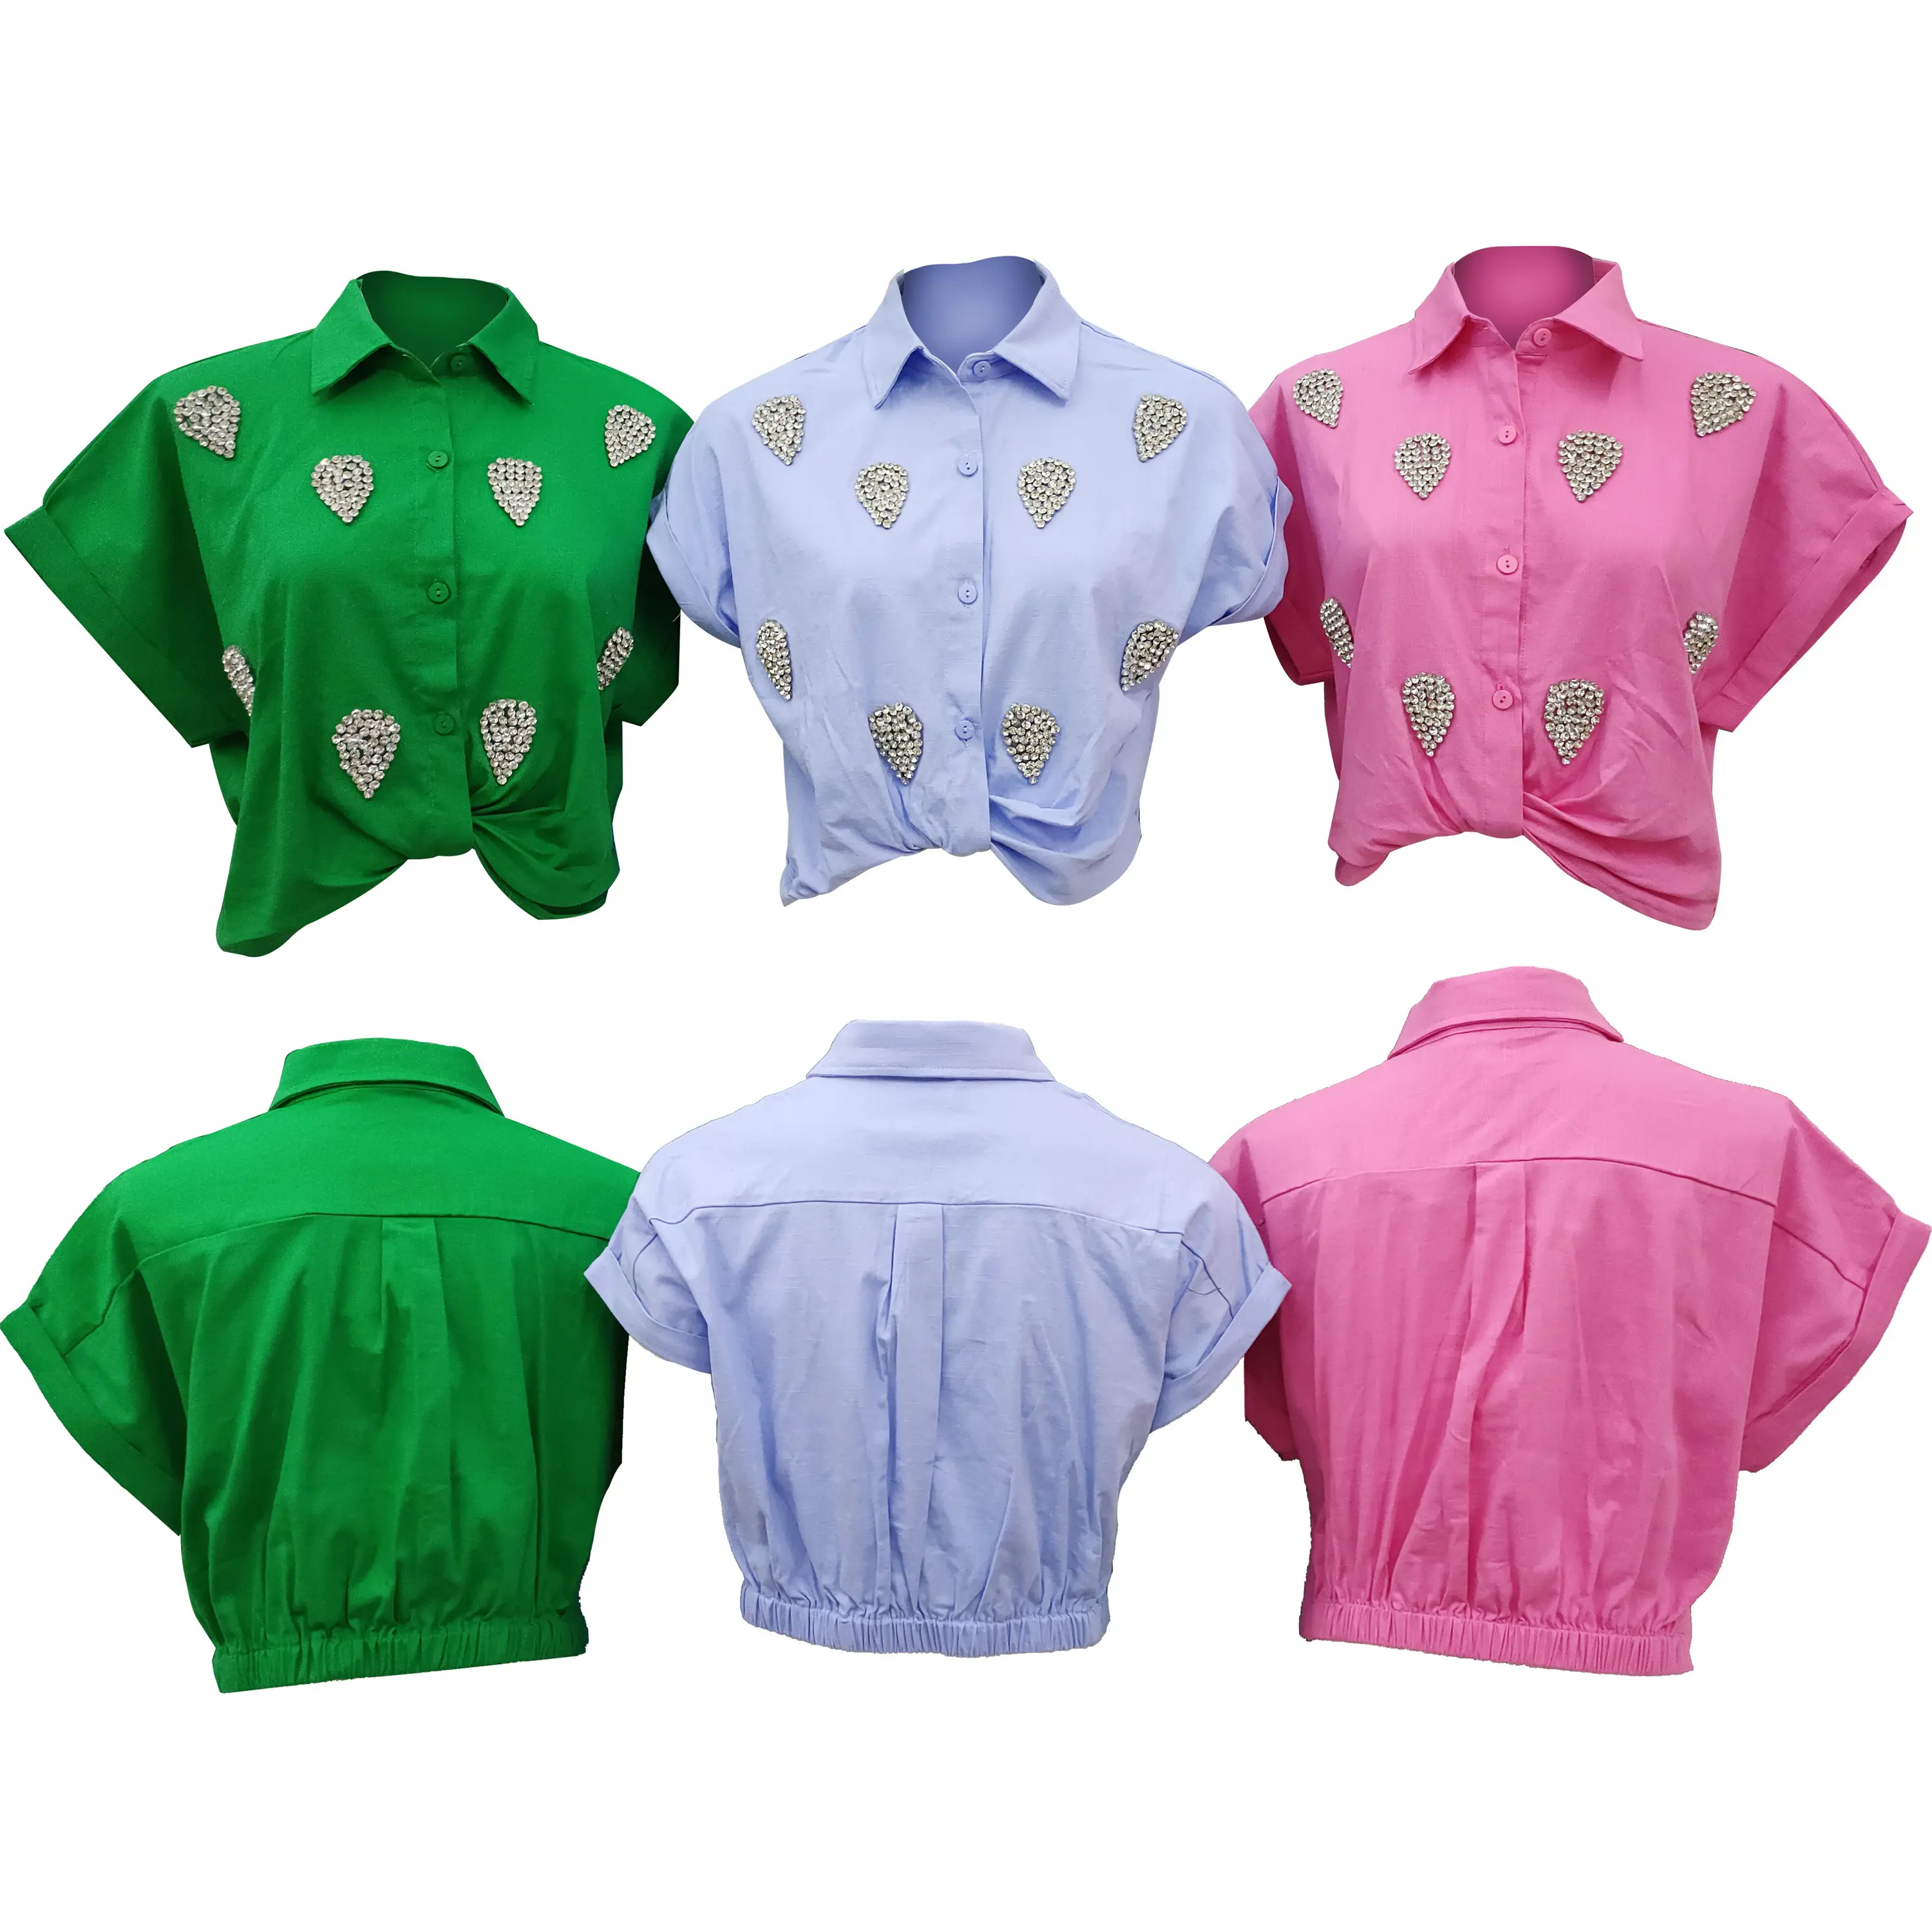 Blouses   Shirts Quick Dry Anti-wrinkle   Anti-shrink ODM Attire for Everyday Summer Spring Wear Stylish